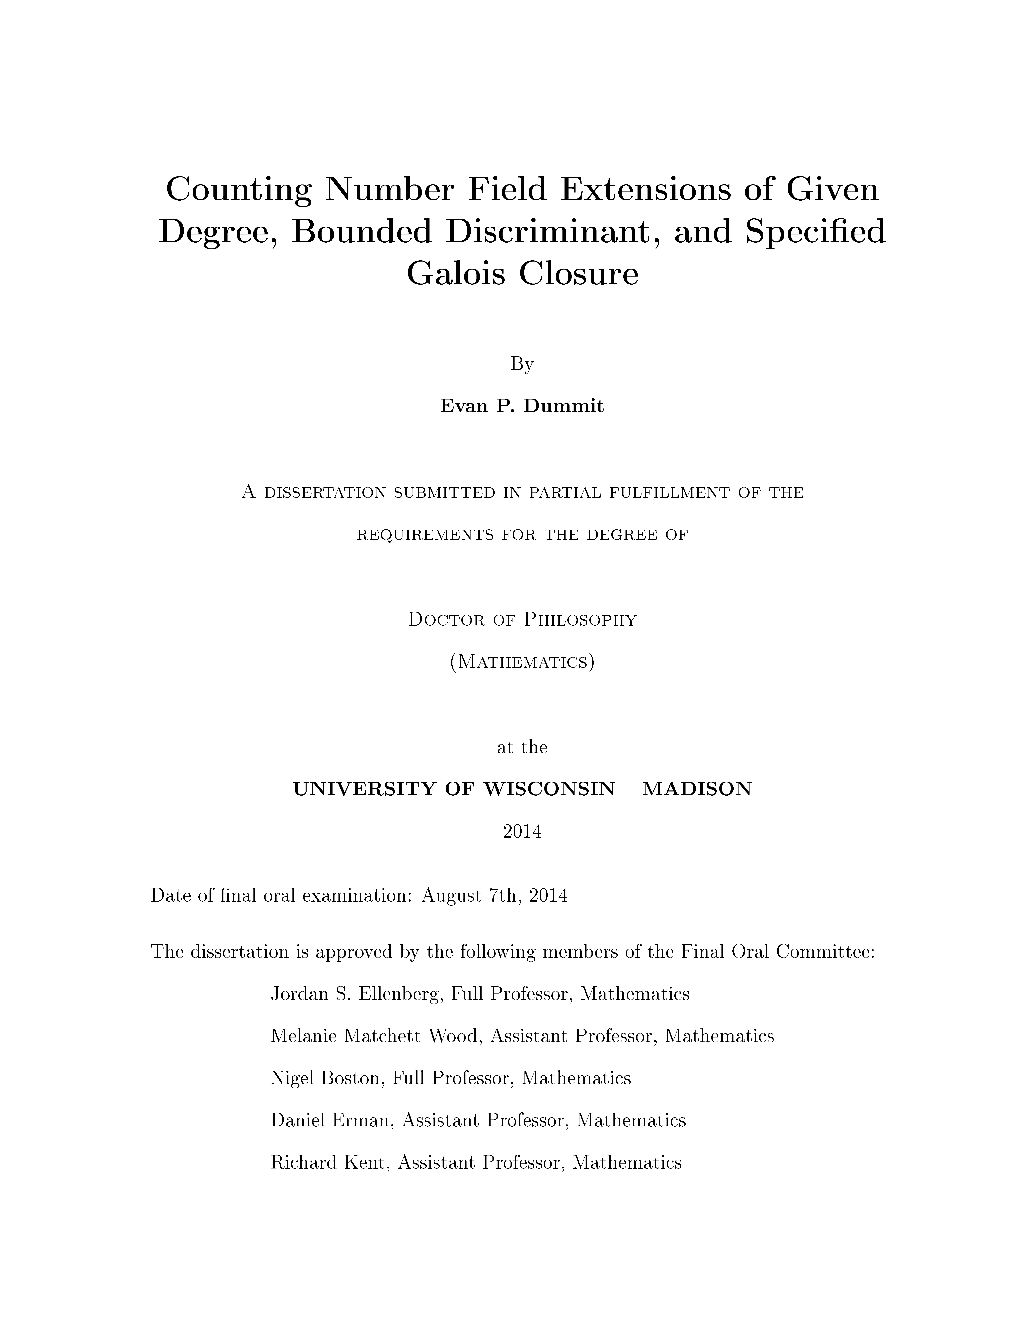 Counting Number Field Extensions of Given Degree, Bounded Discriminant, and SpeciEd Galois Closure